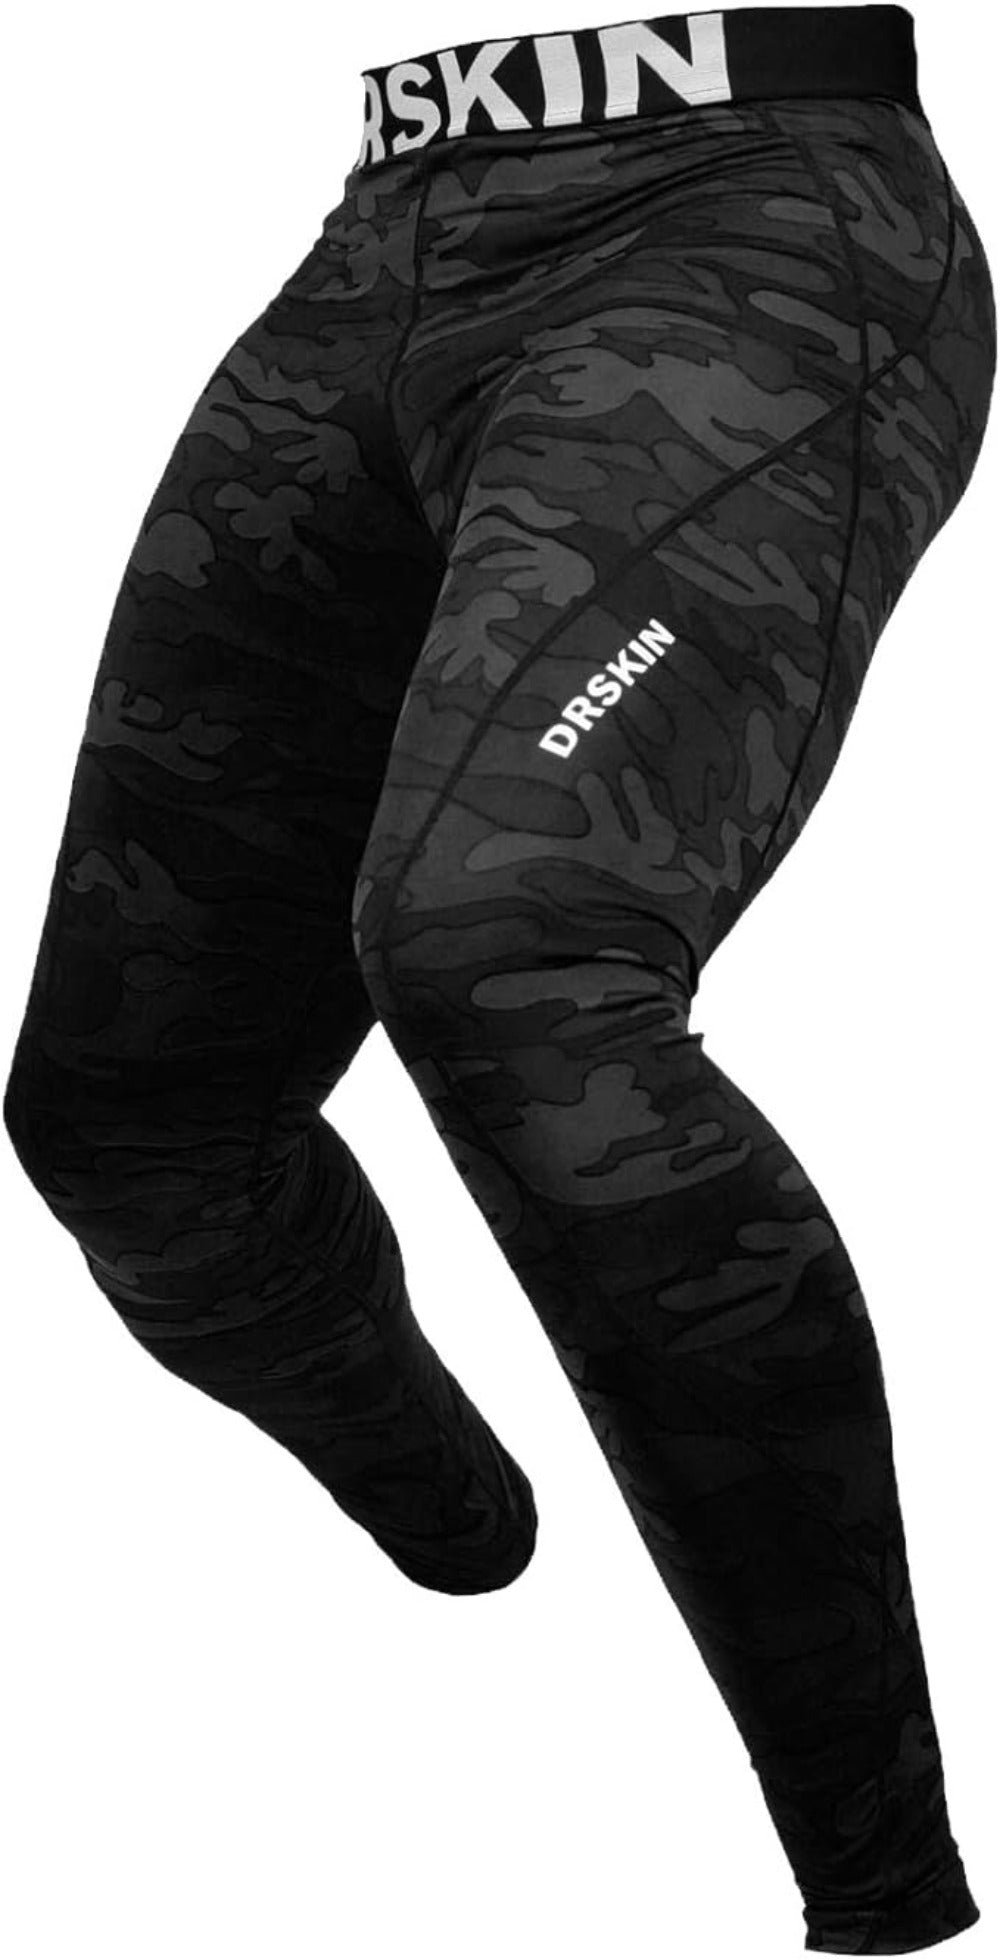 Men Compression Tight Pants Base Layer Running, Gym, Sports Skin Fit Under  Tight